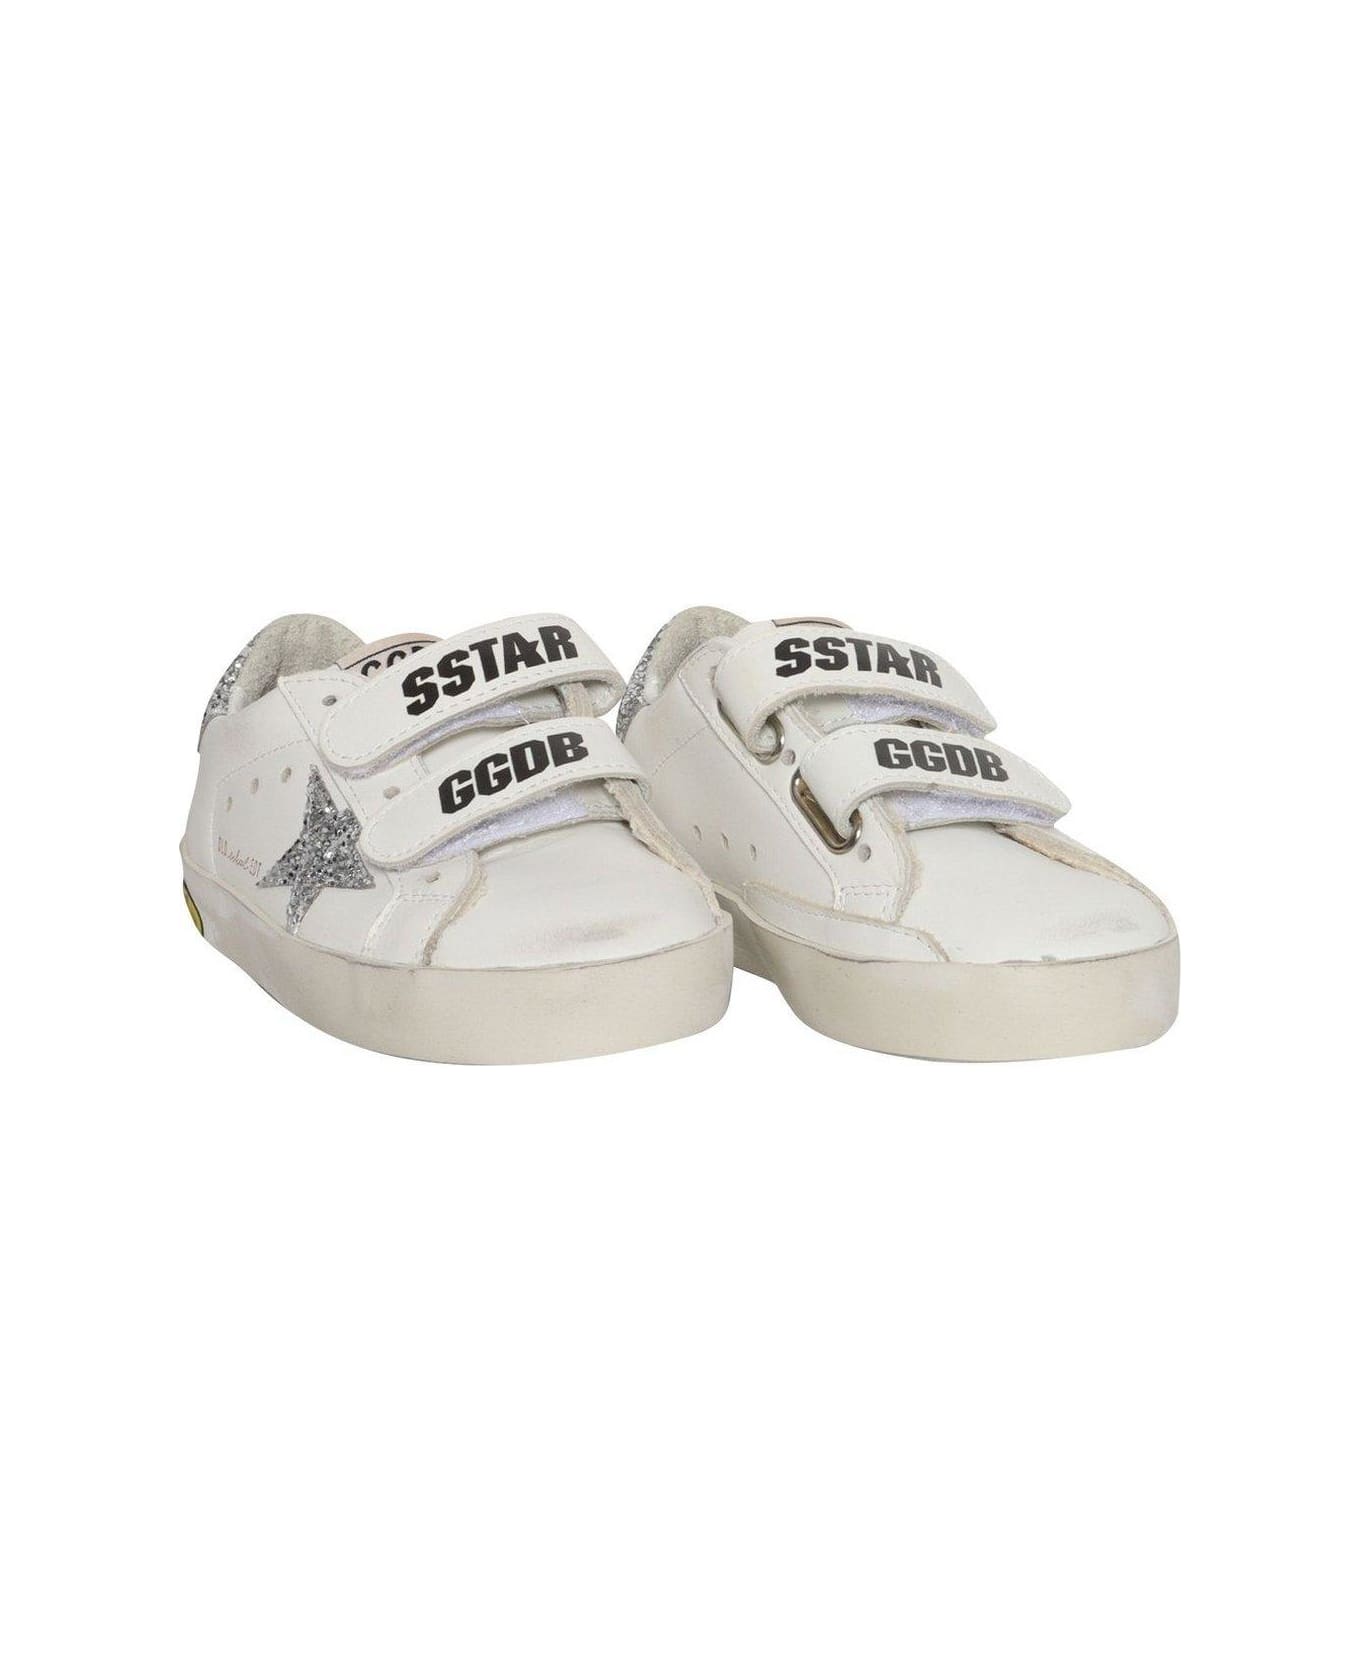 Golden Goose Old School Star Patch Sneakers - White/ice/silver シューズ